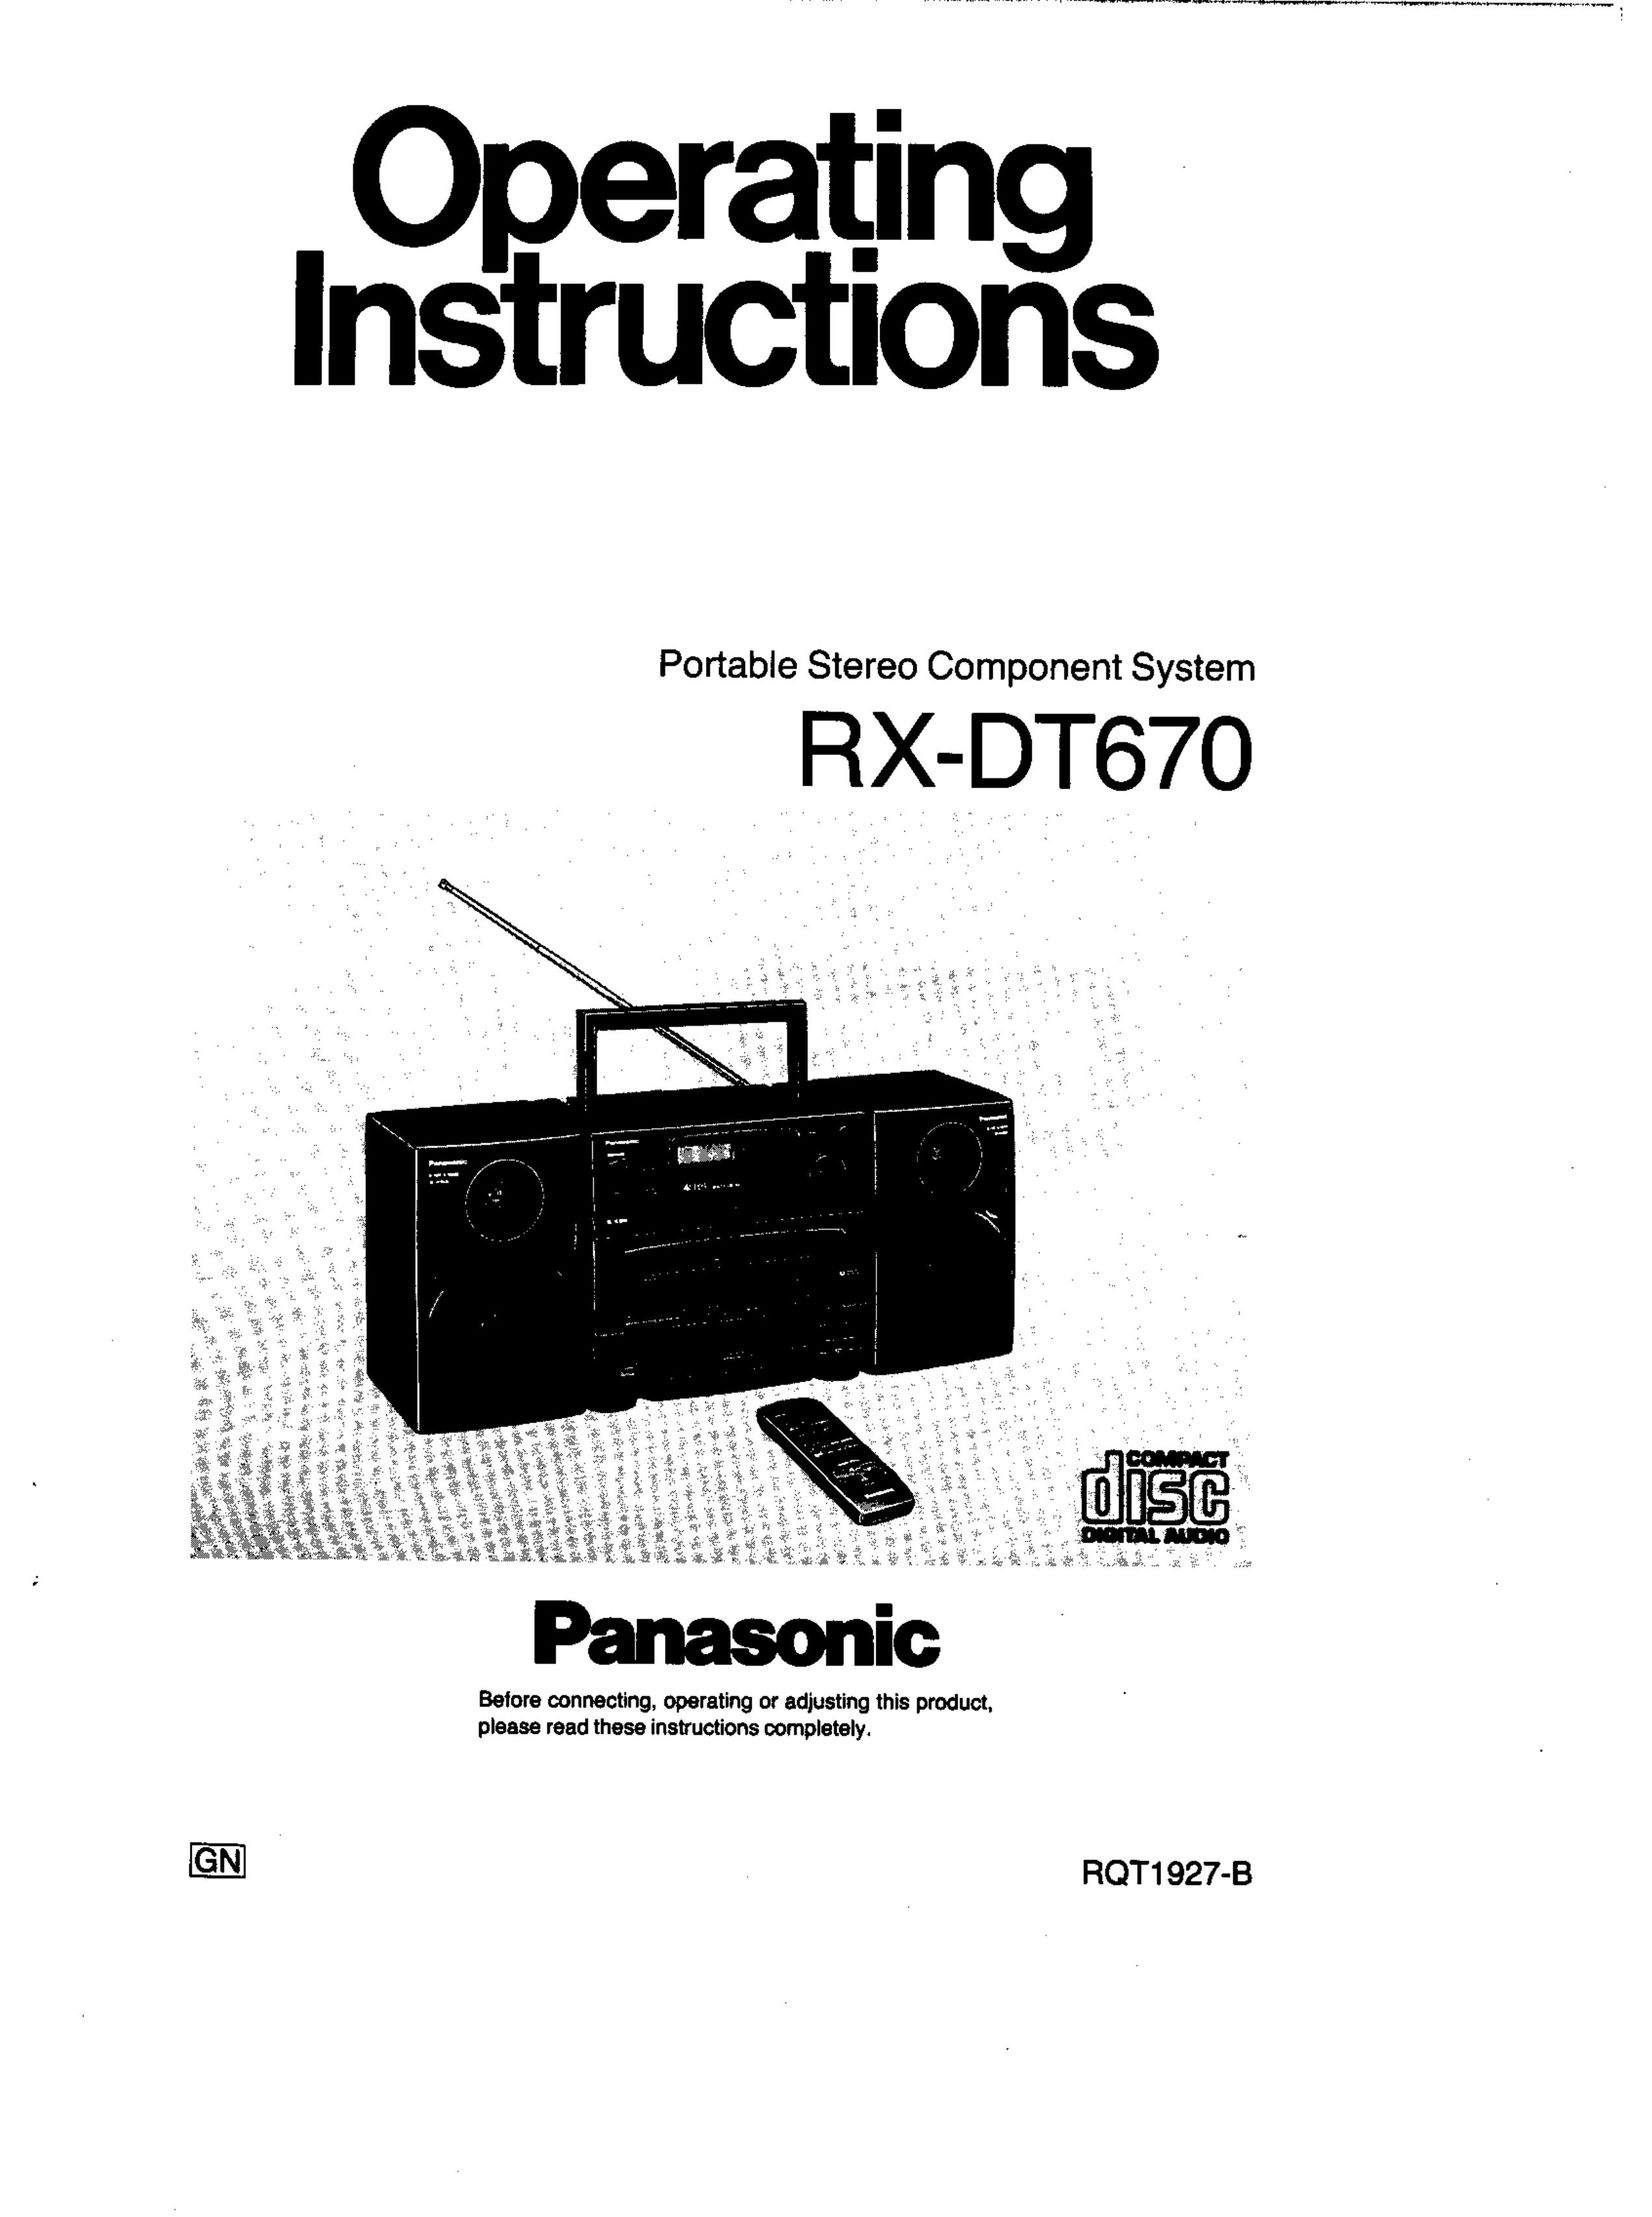 Panasonic RX-DT670 Stereo System User Manual